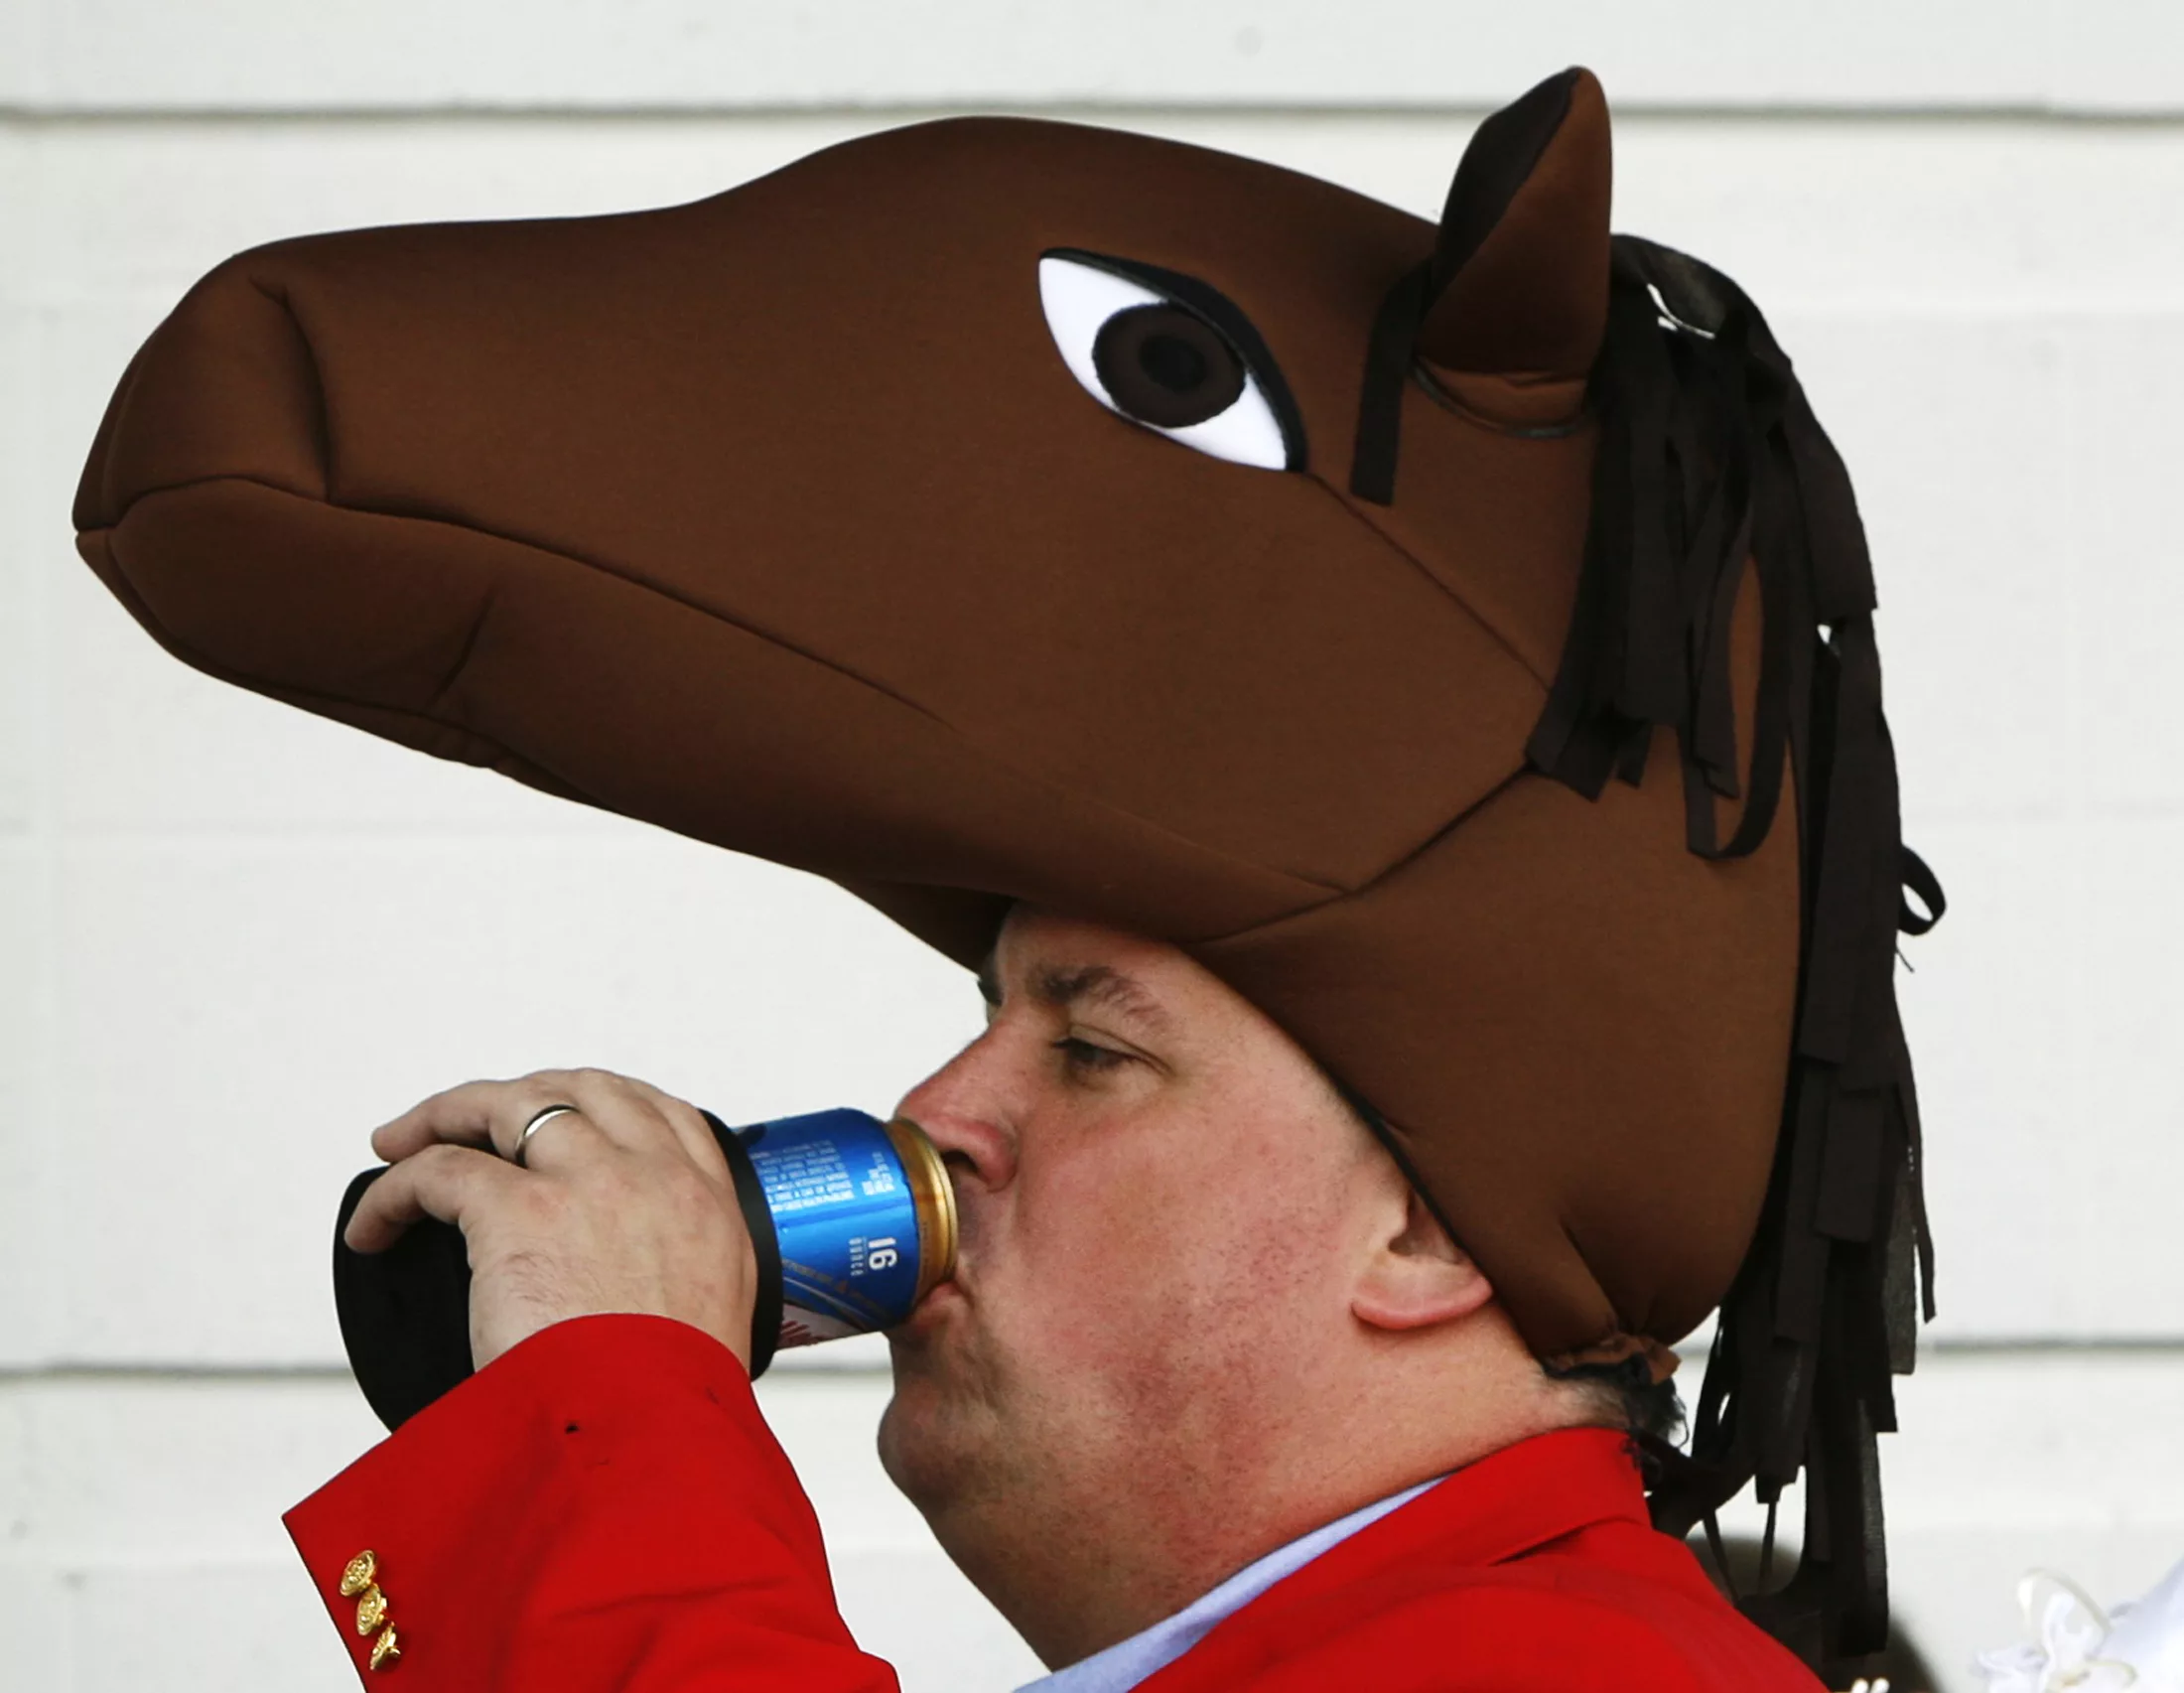 a-race-fan-wearing-a-horse-head-hat-pauses-for-refreshment-ahead-of-the-135th-running-of-the-kentucky-derby-at-churchill-downs-in-louisville